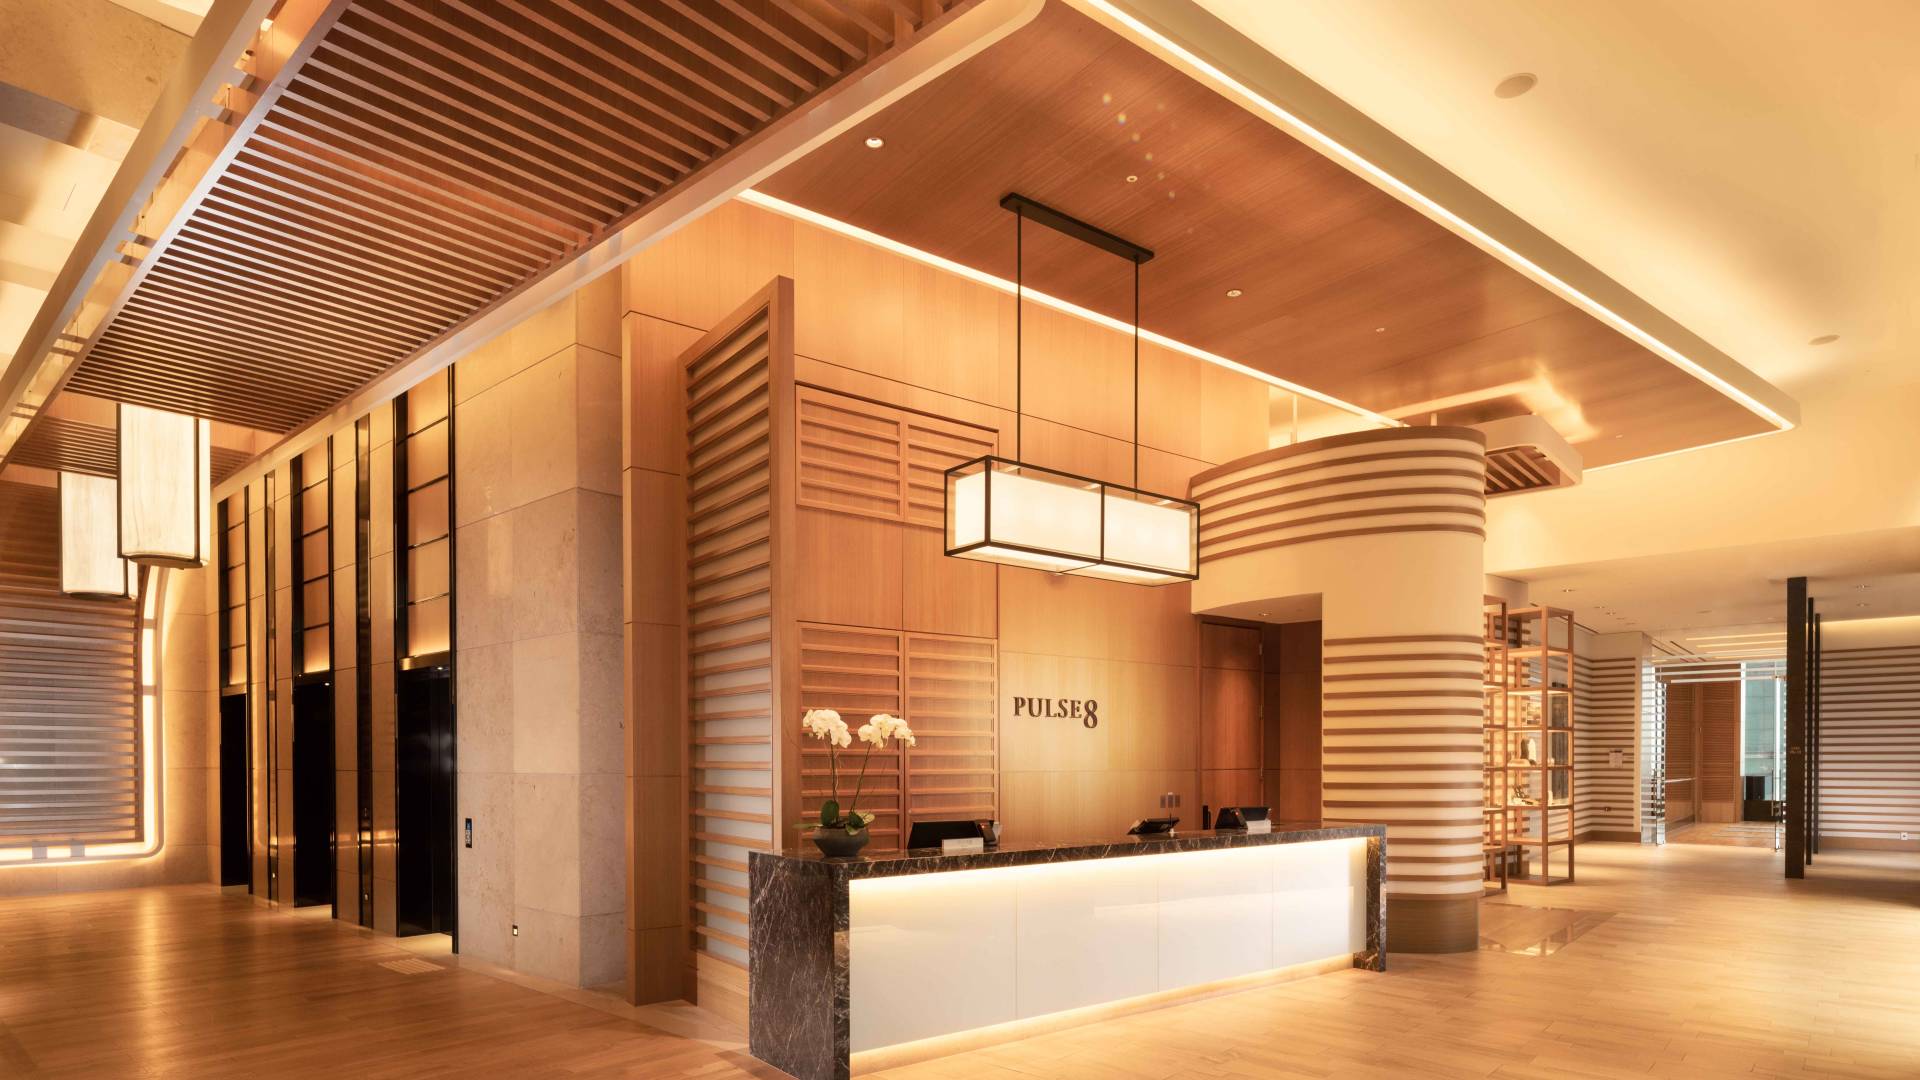 Pulse8 Reception desk. Decorative wood paneling and warm, modern lighting complete the space.